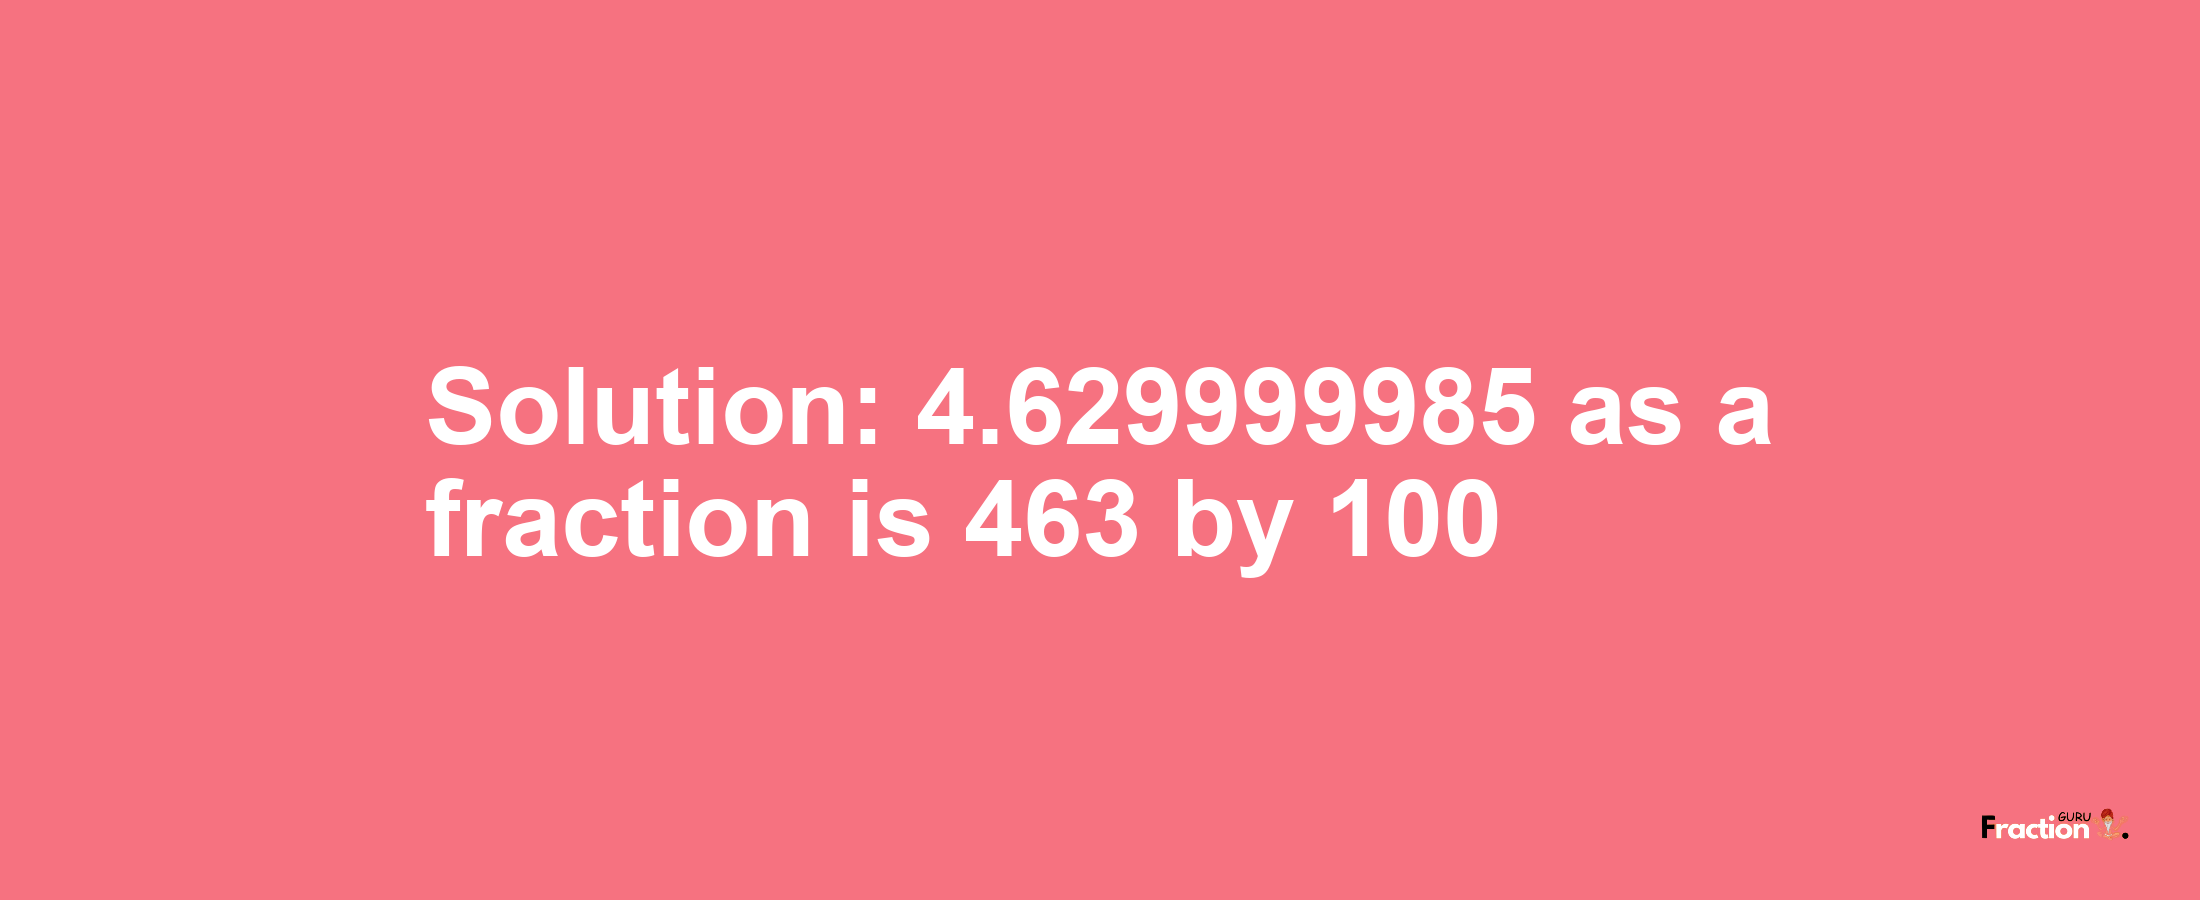 Solution:4.629999985 as a fraction is 463/100